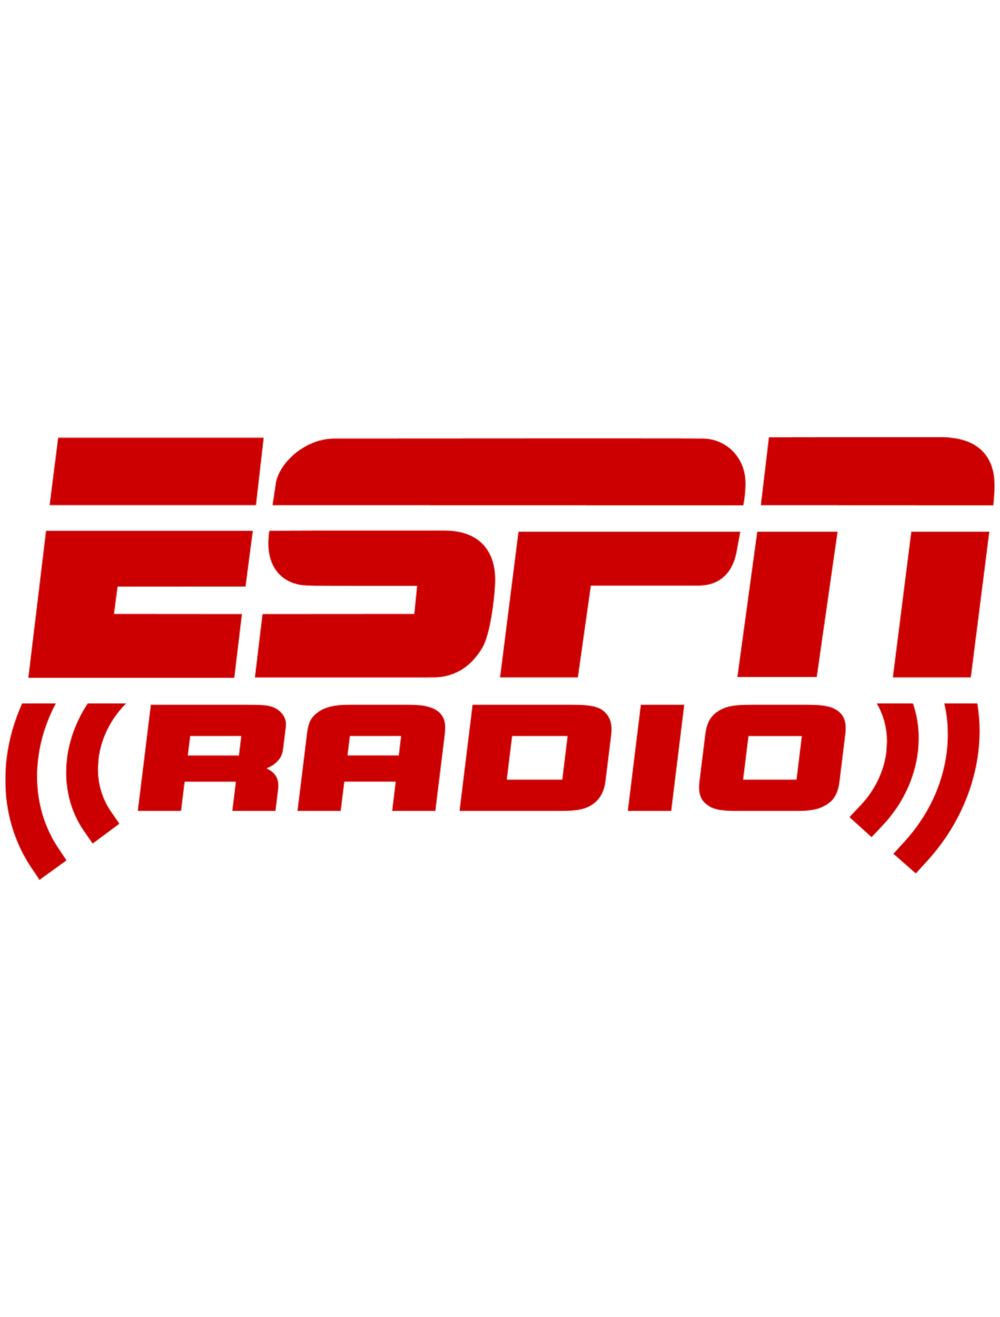 ESPN LOGO PNG Picture